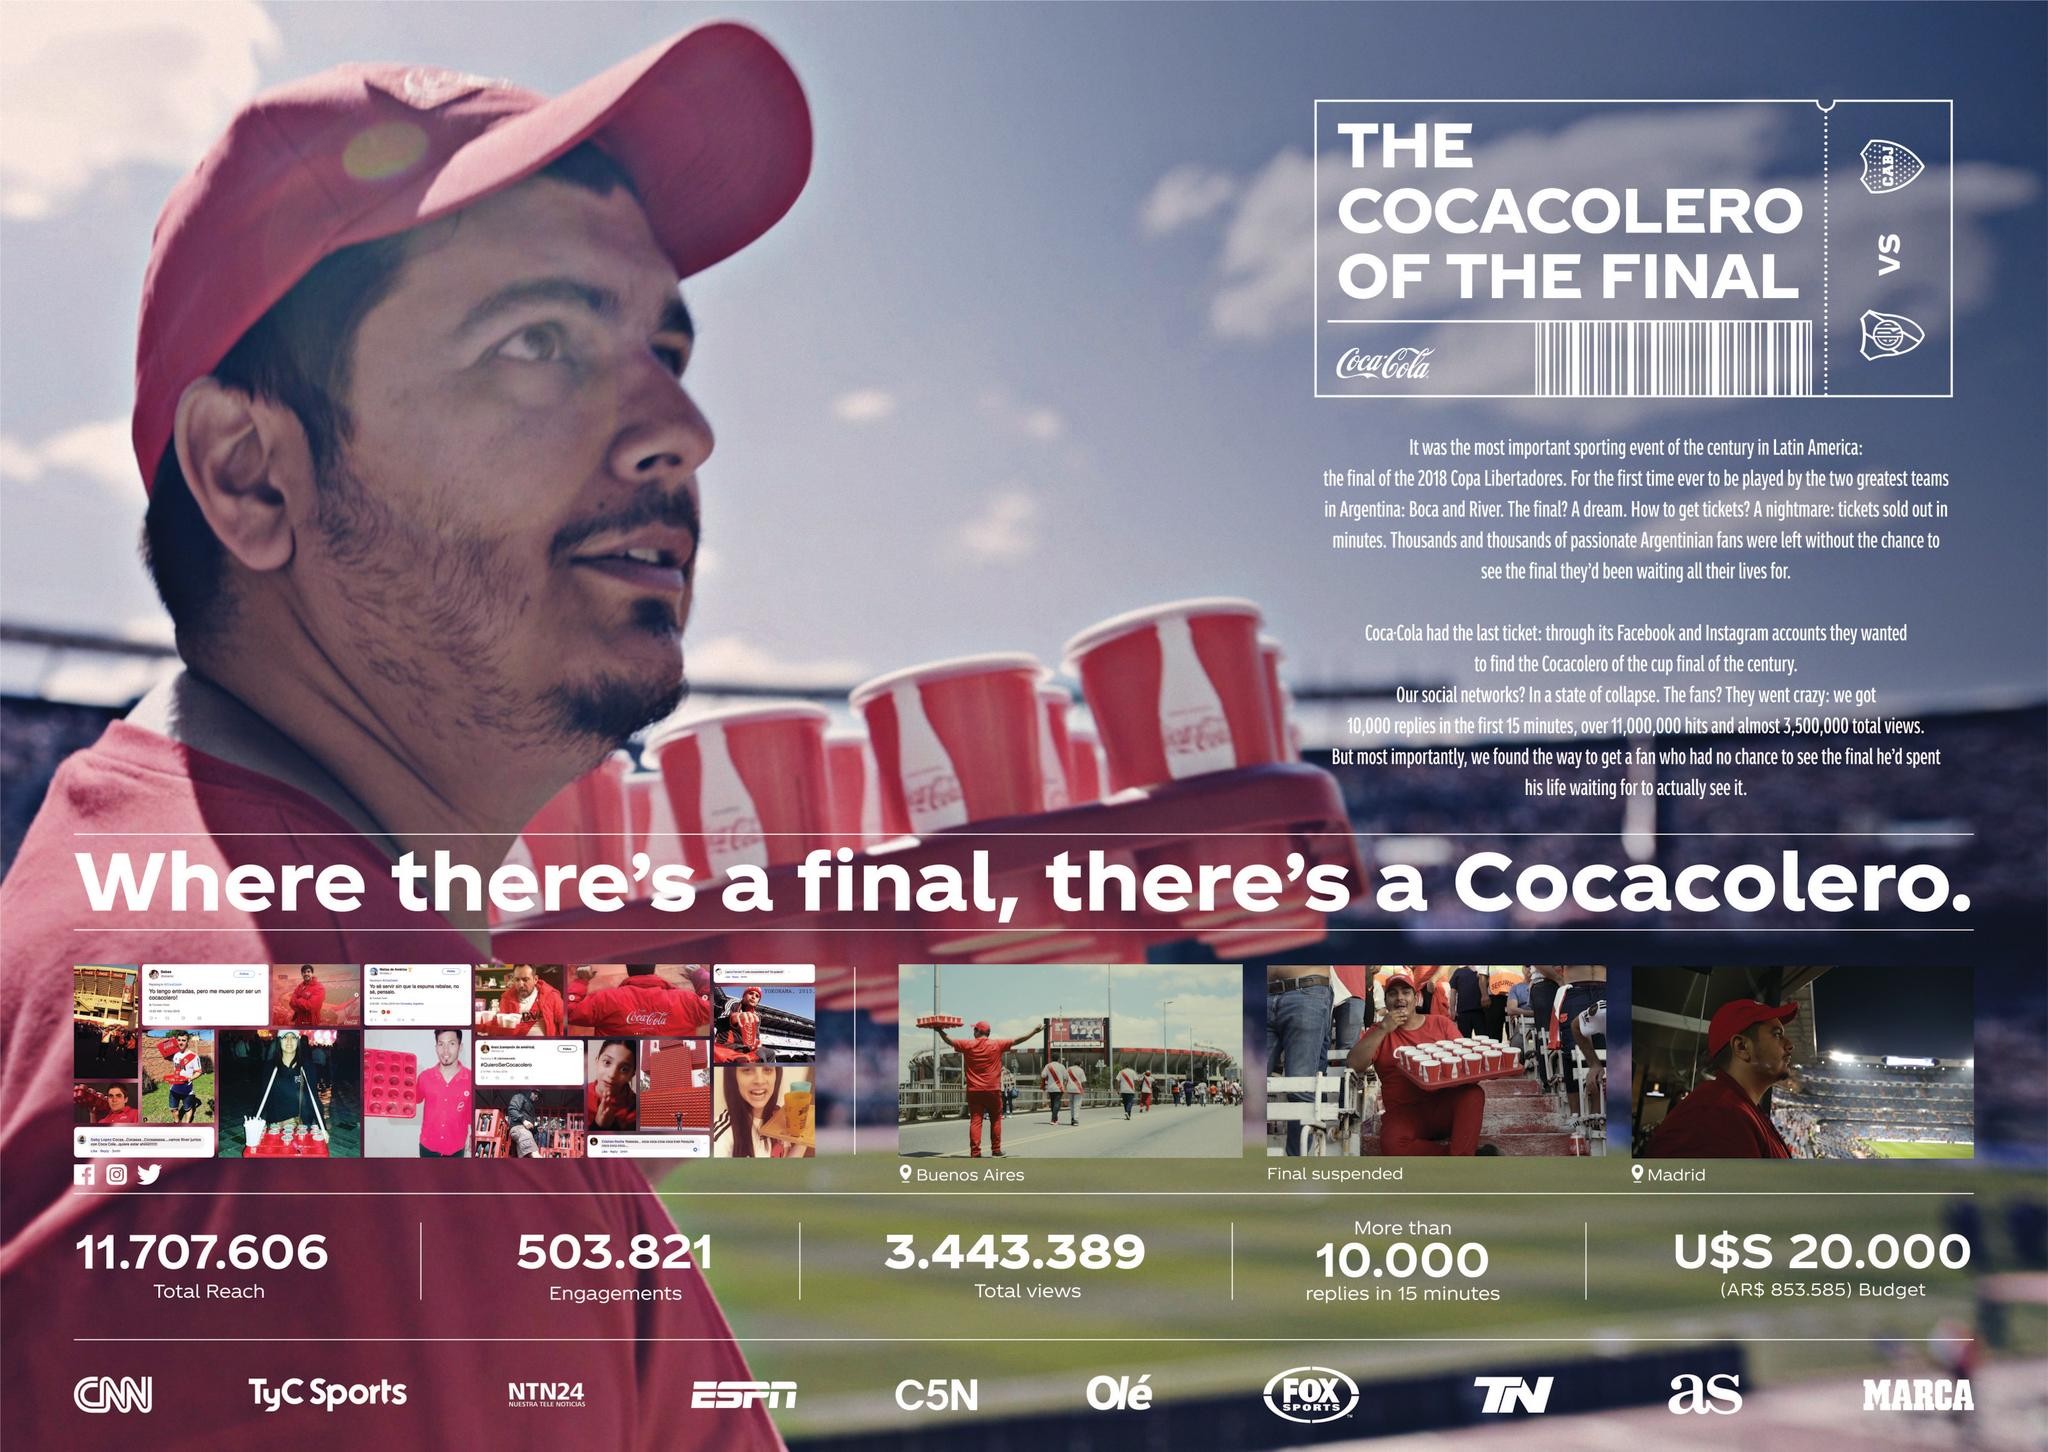 Cocacolero of the final